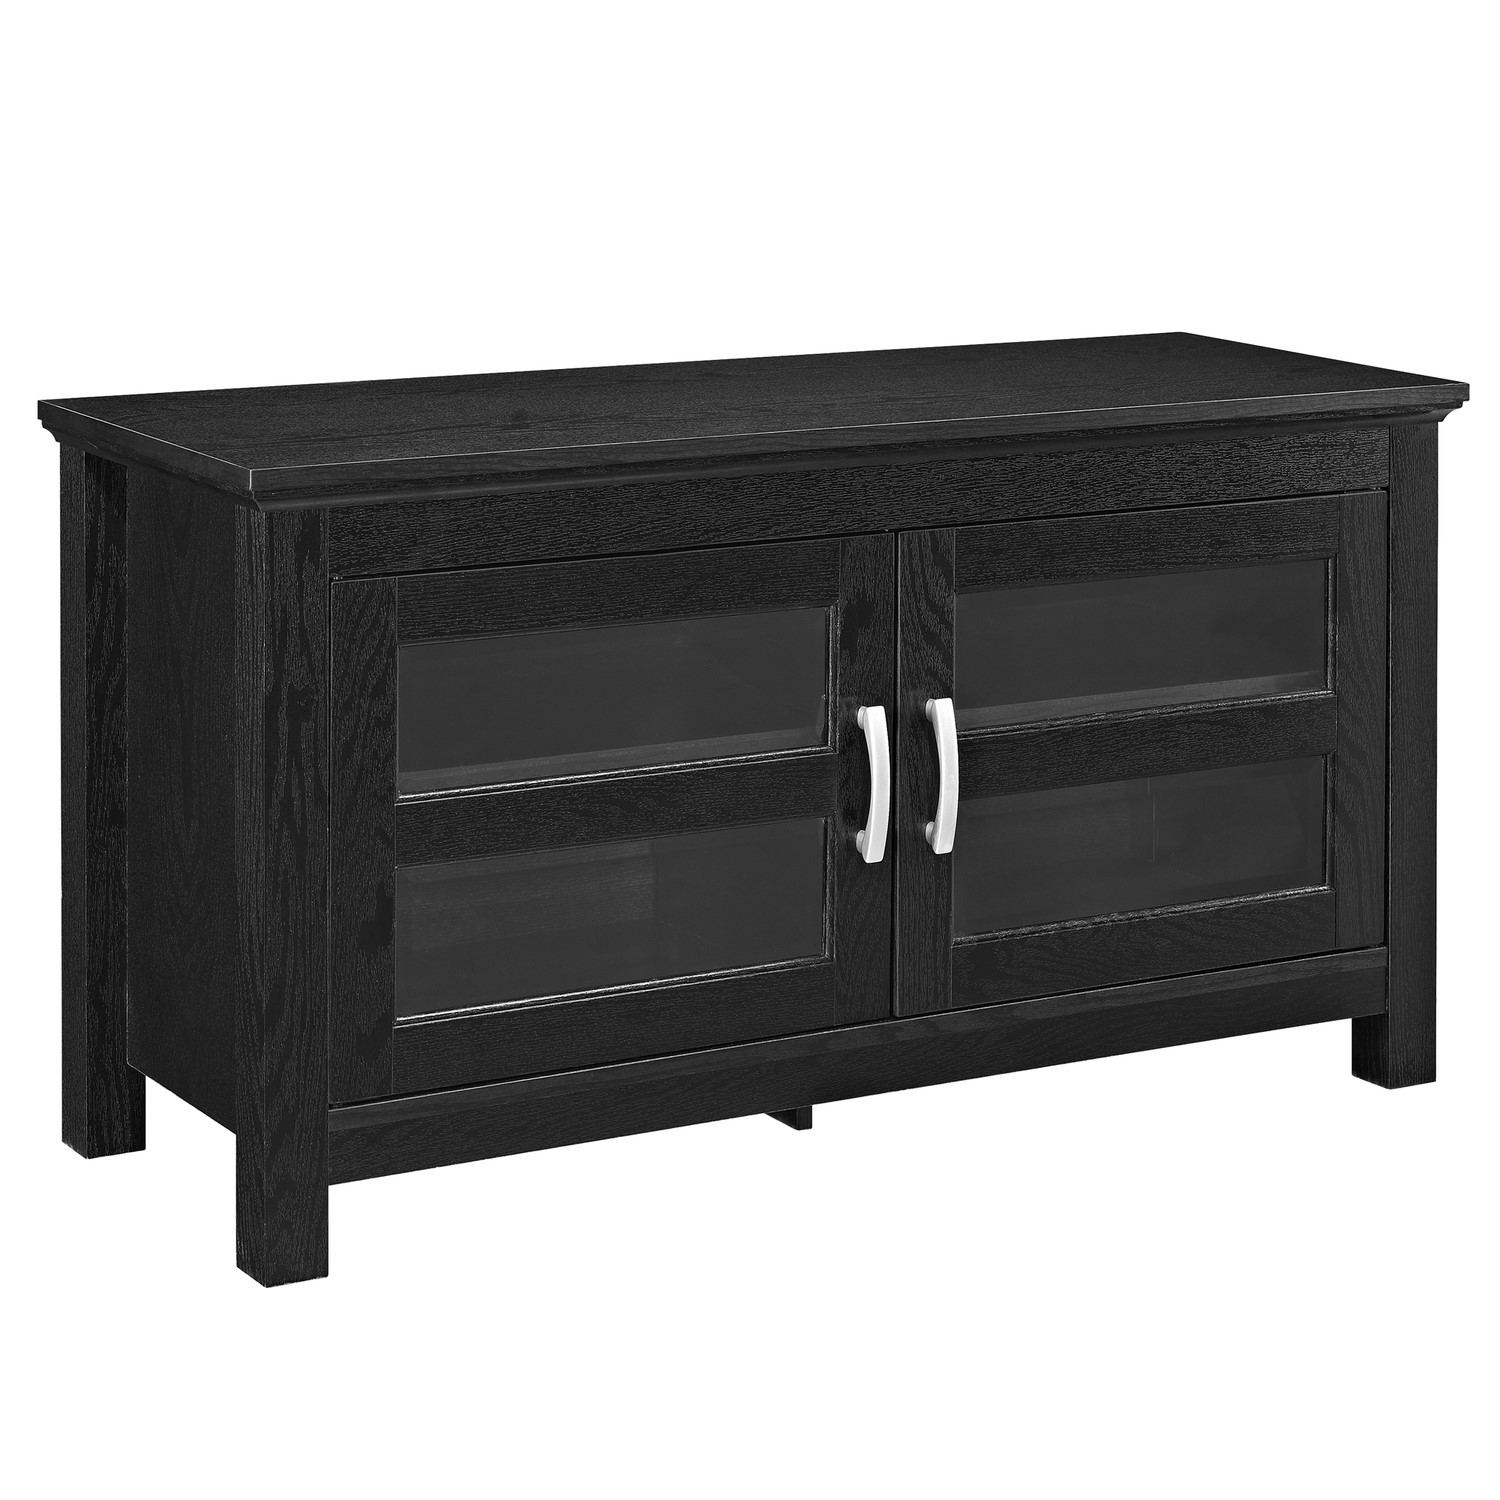 Foster Black Wooden TV Unit with Double Doors - TV's up to 48